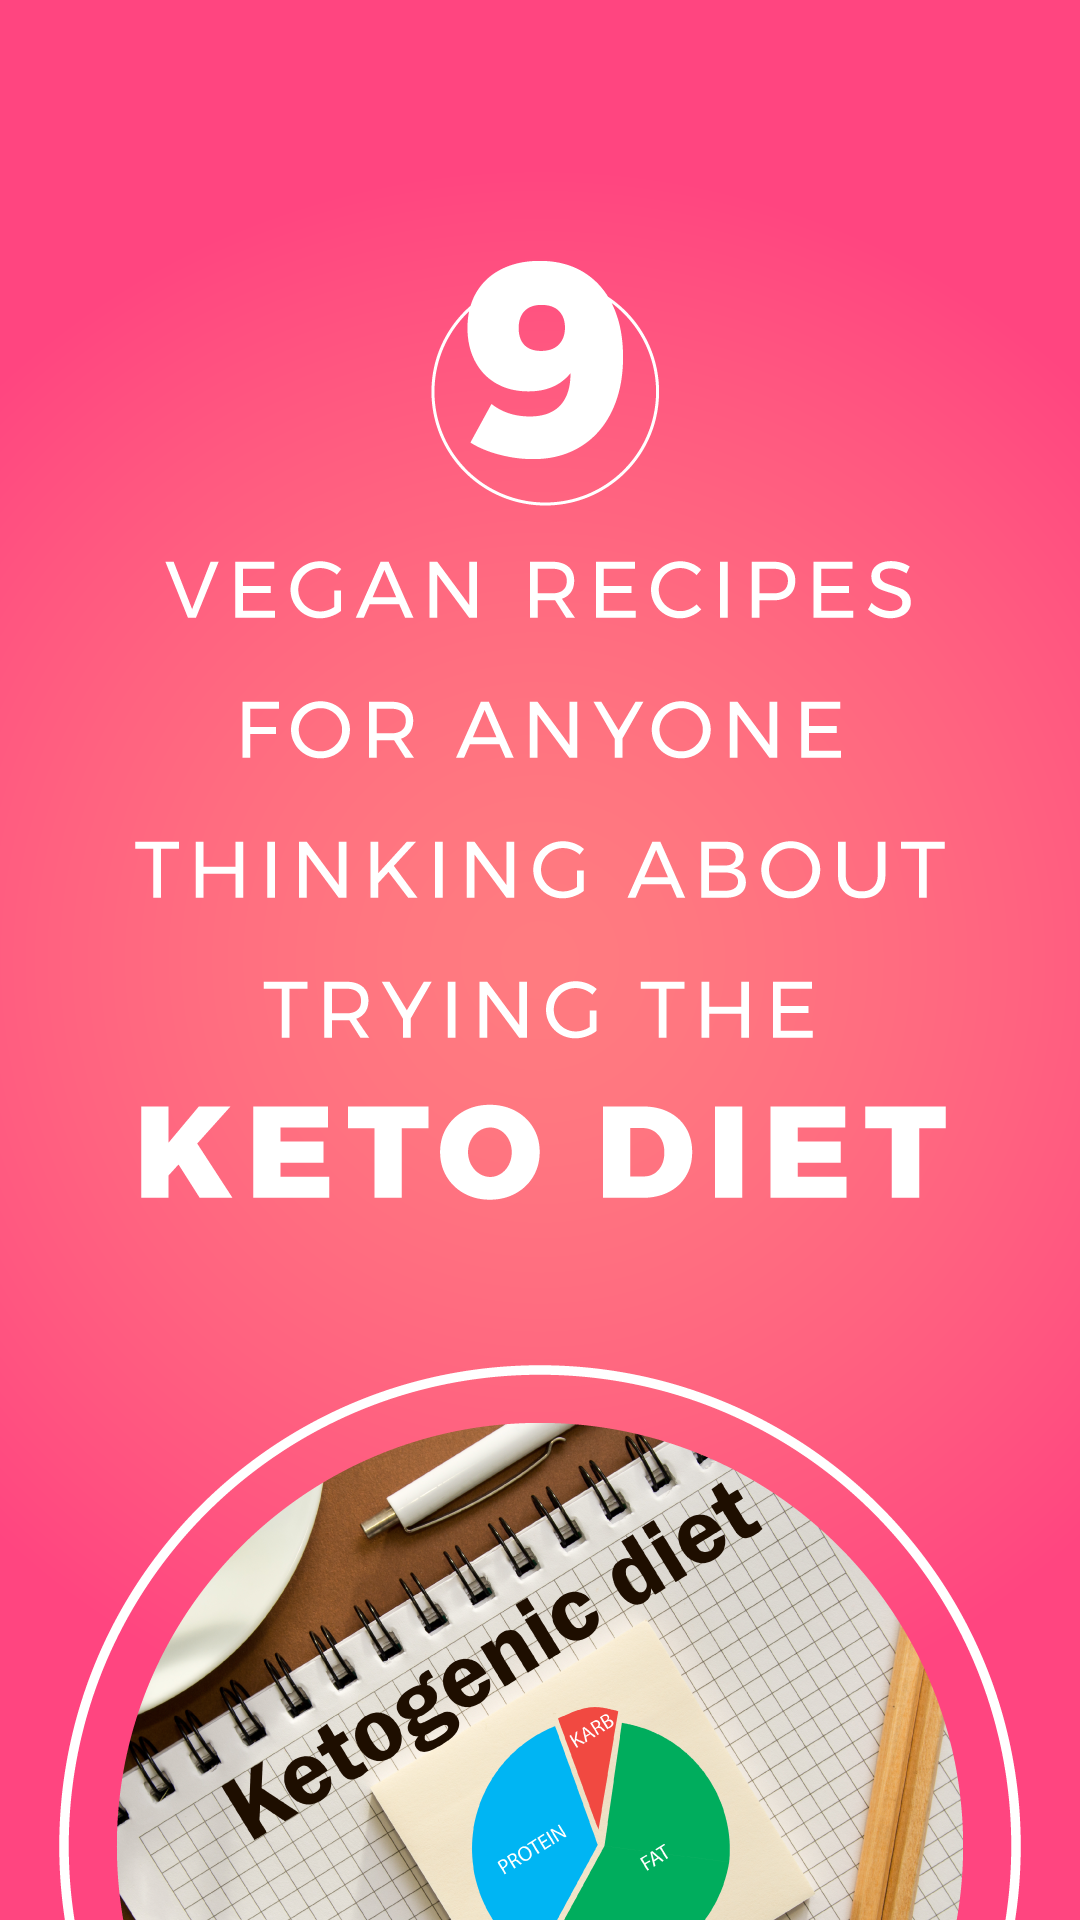 9 Vegan Recipes for Anyone Thinking About Trying the Keto Diet